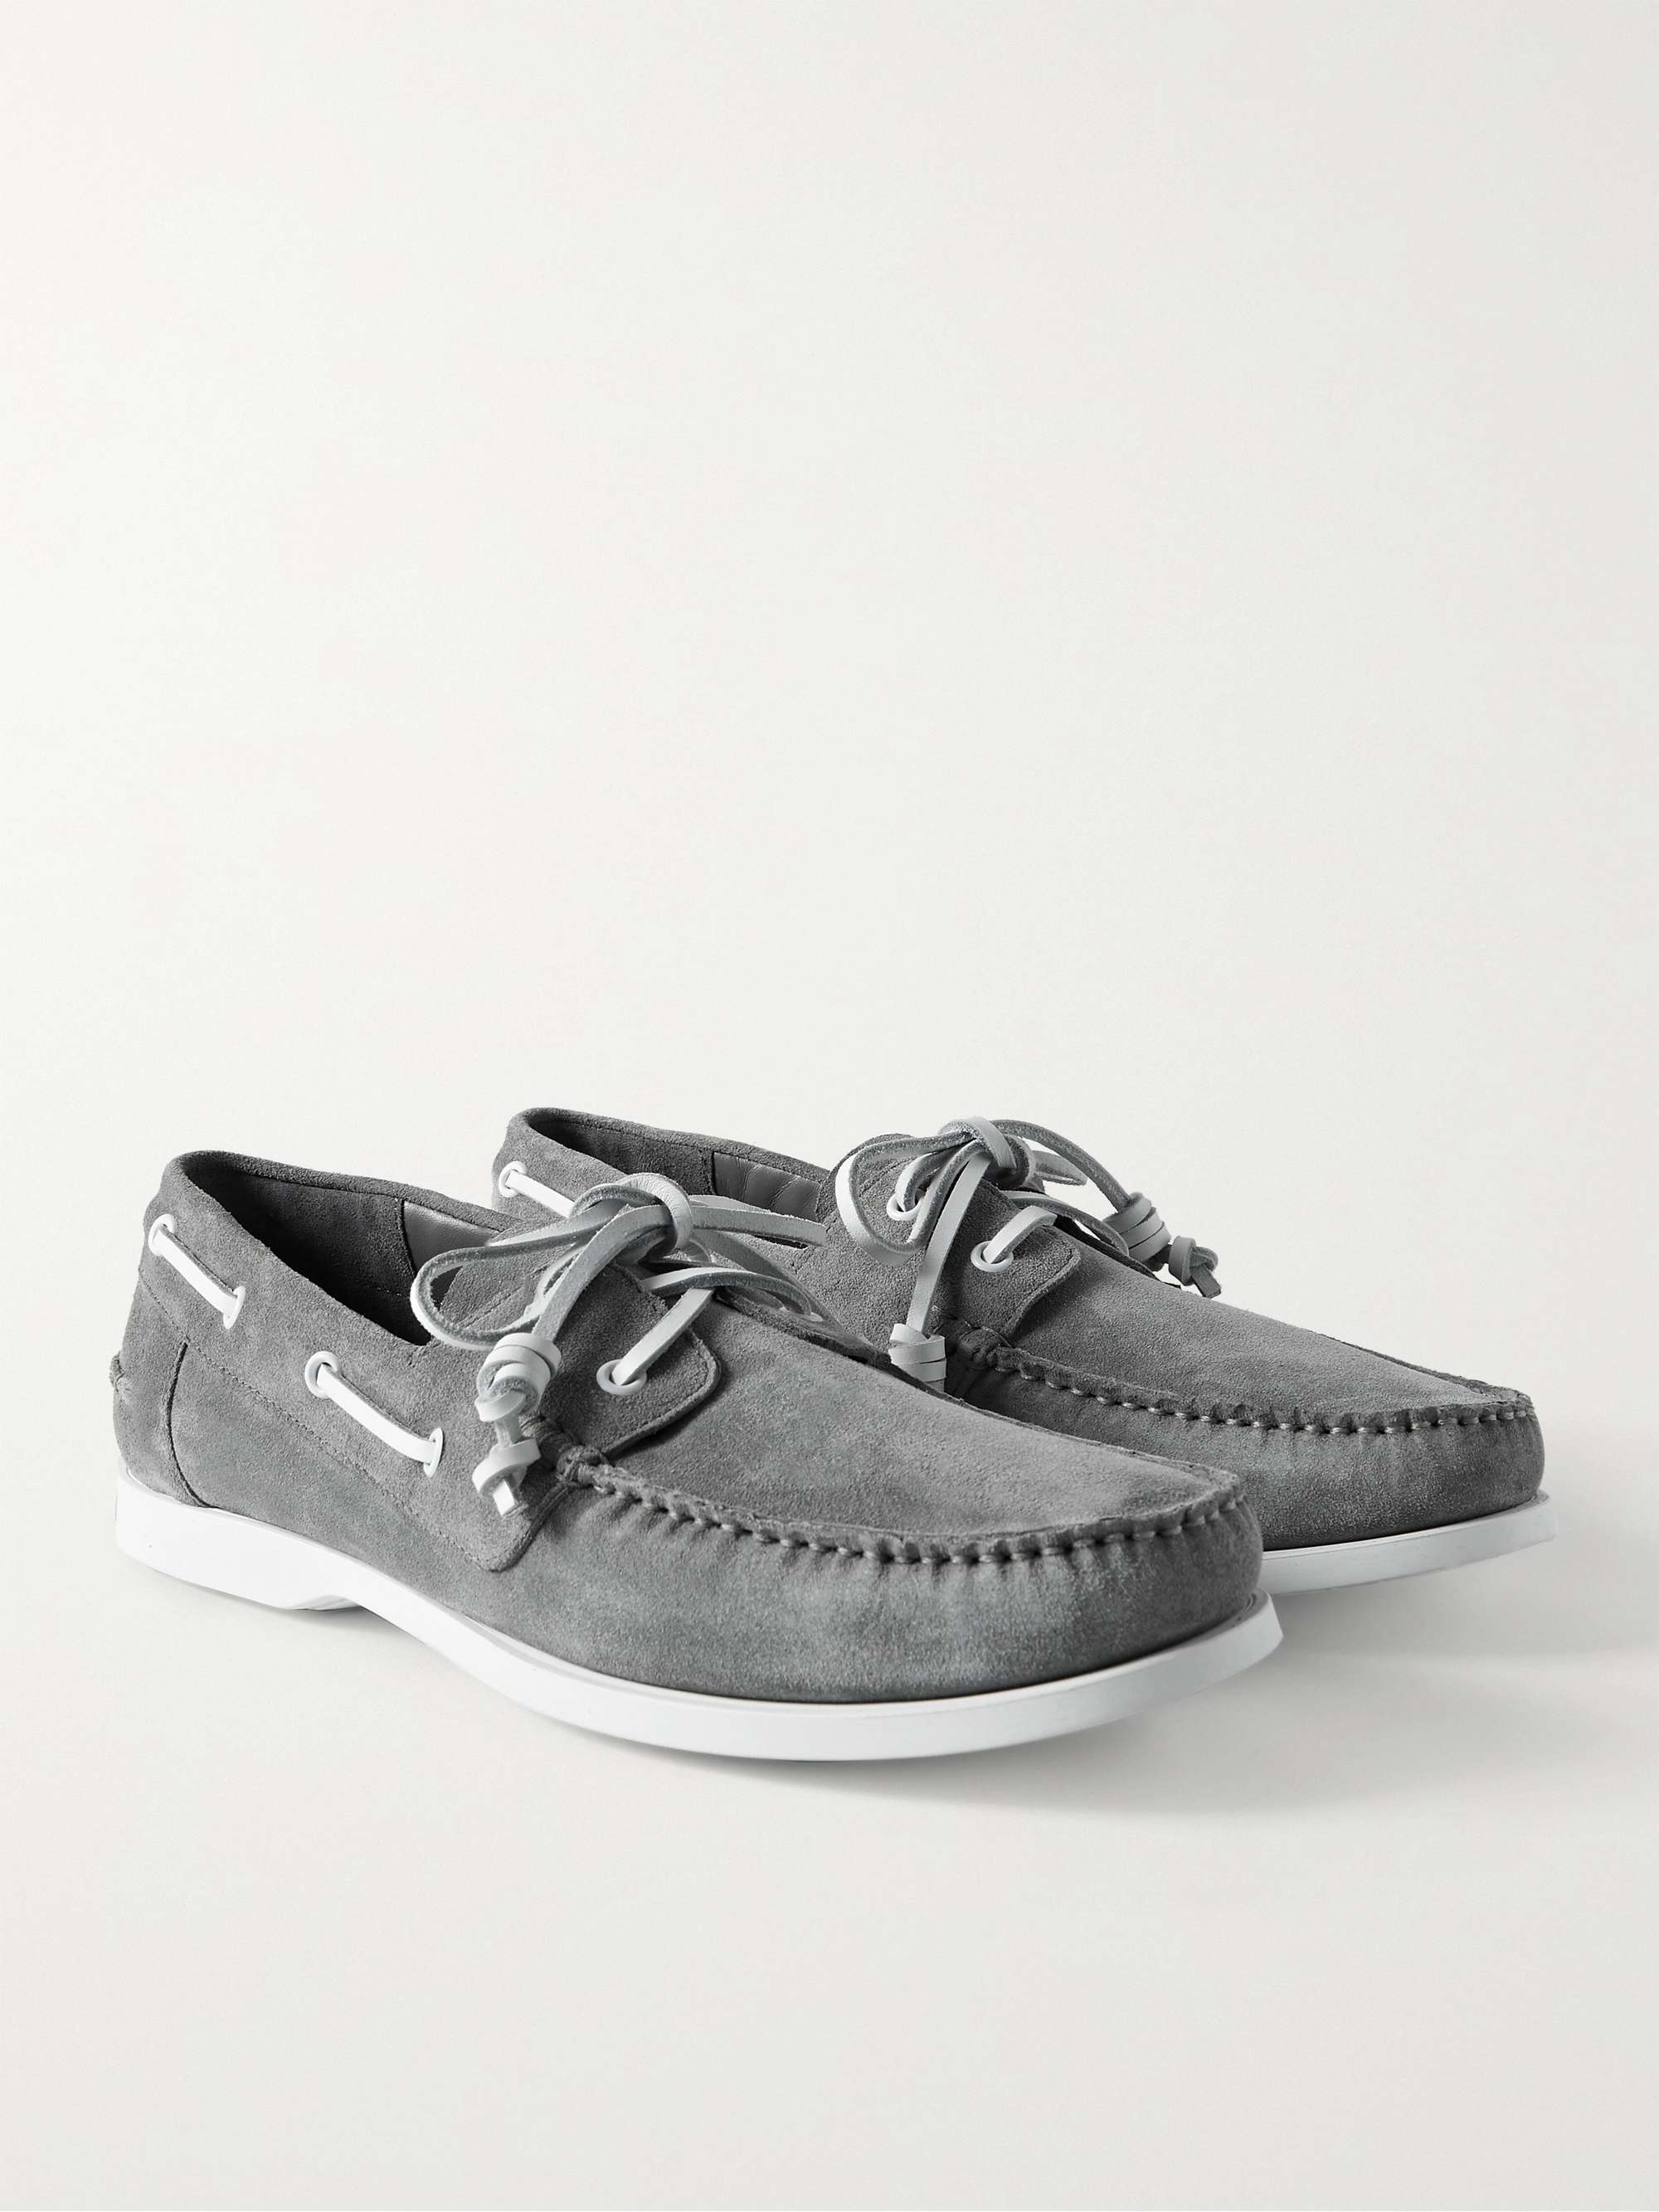 MANOLO BLAHNIK Sidmouth Suede Boat Shoes